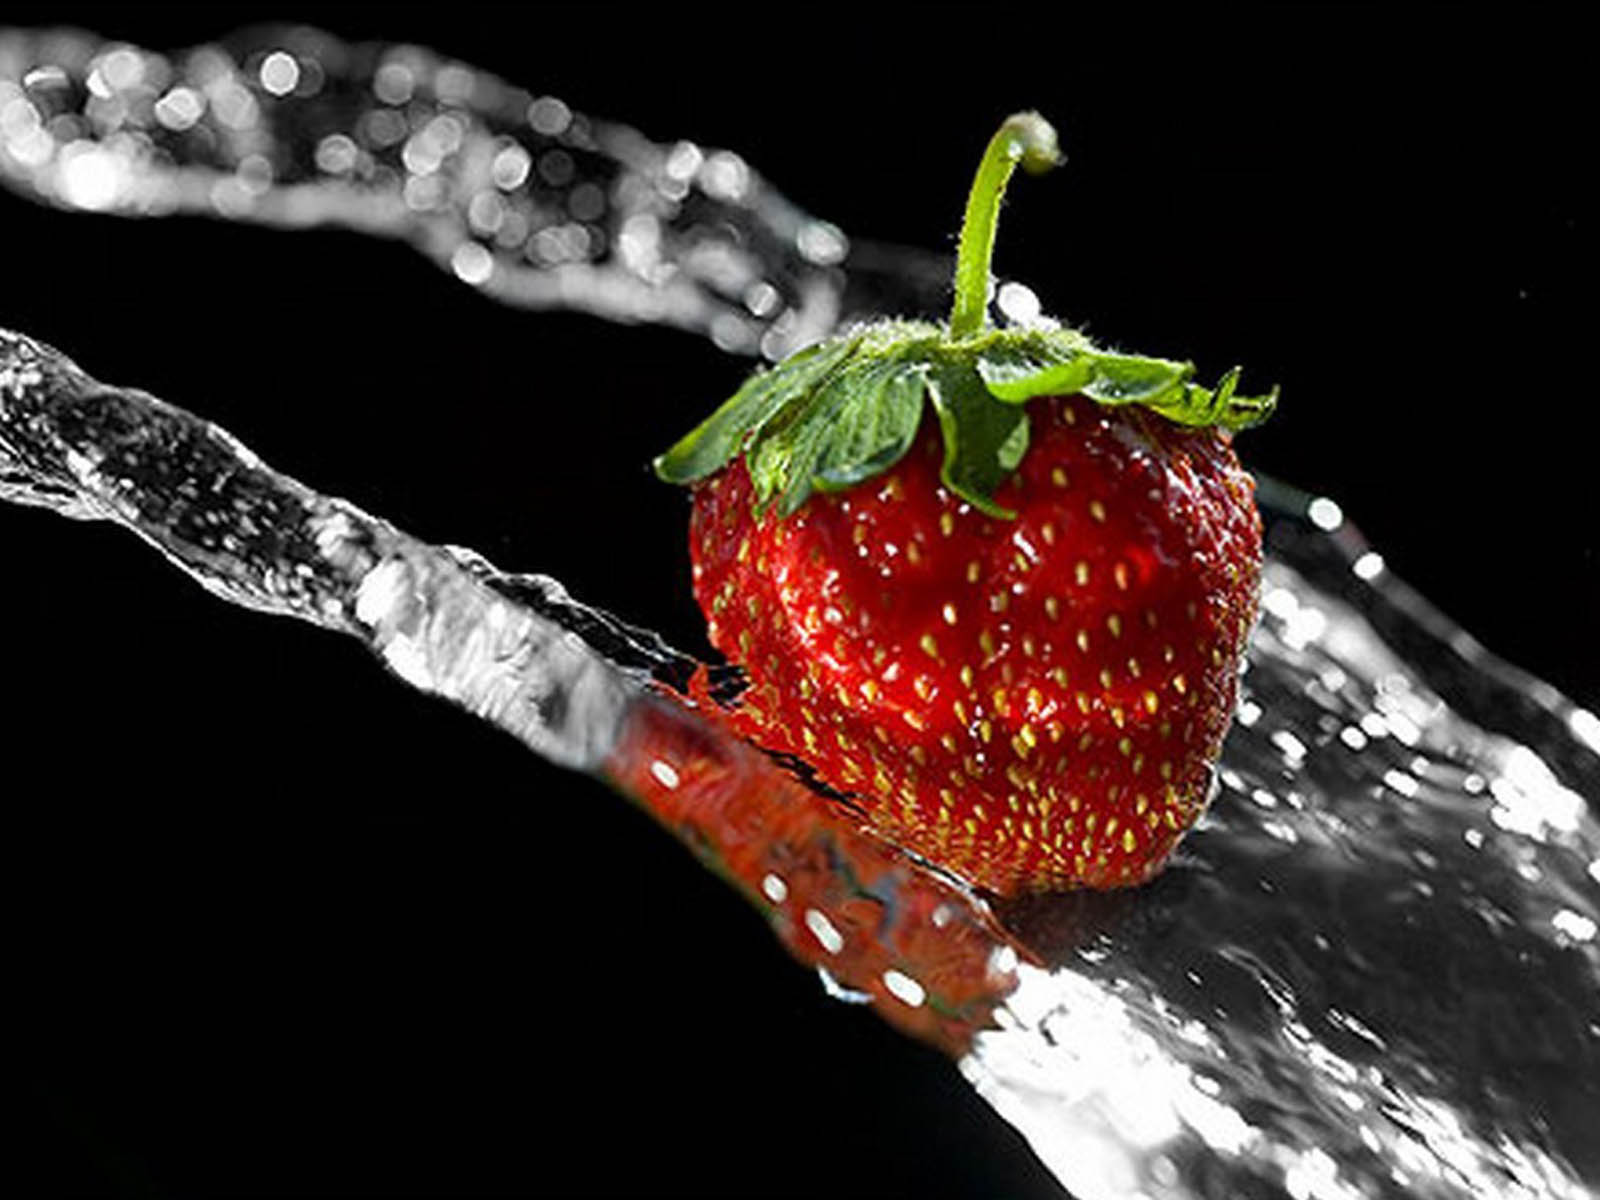 Wallpapers Strawberry Wallpapers HD Wallpapers Download Free Images Wallpaper [wallpaper981.blogspot.com]